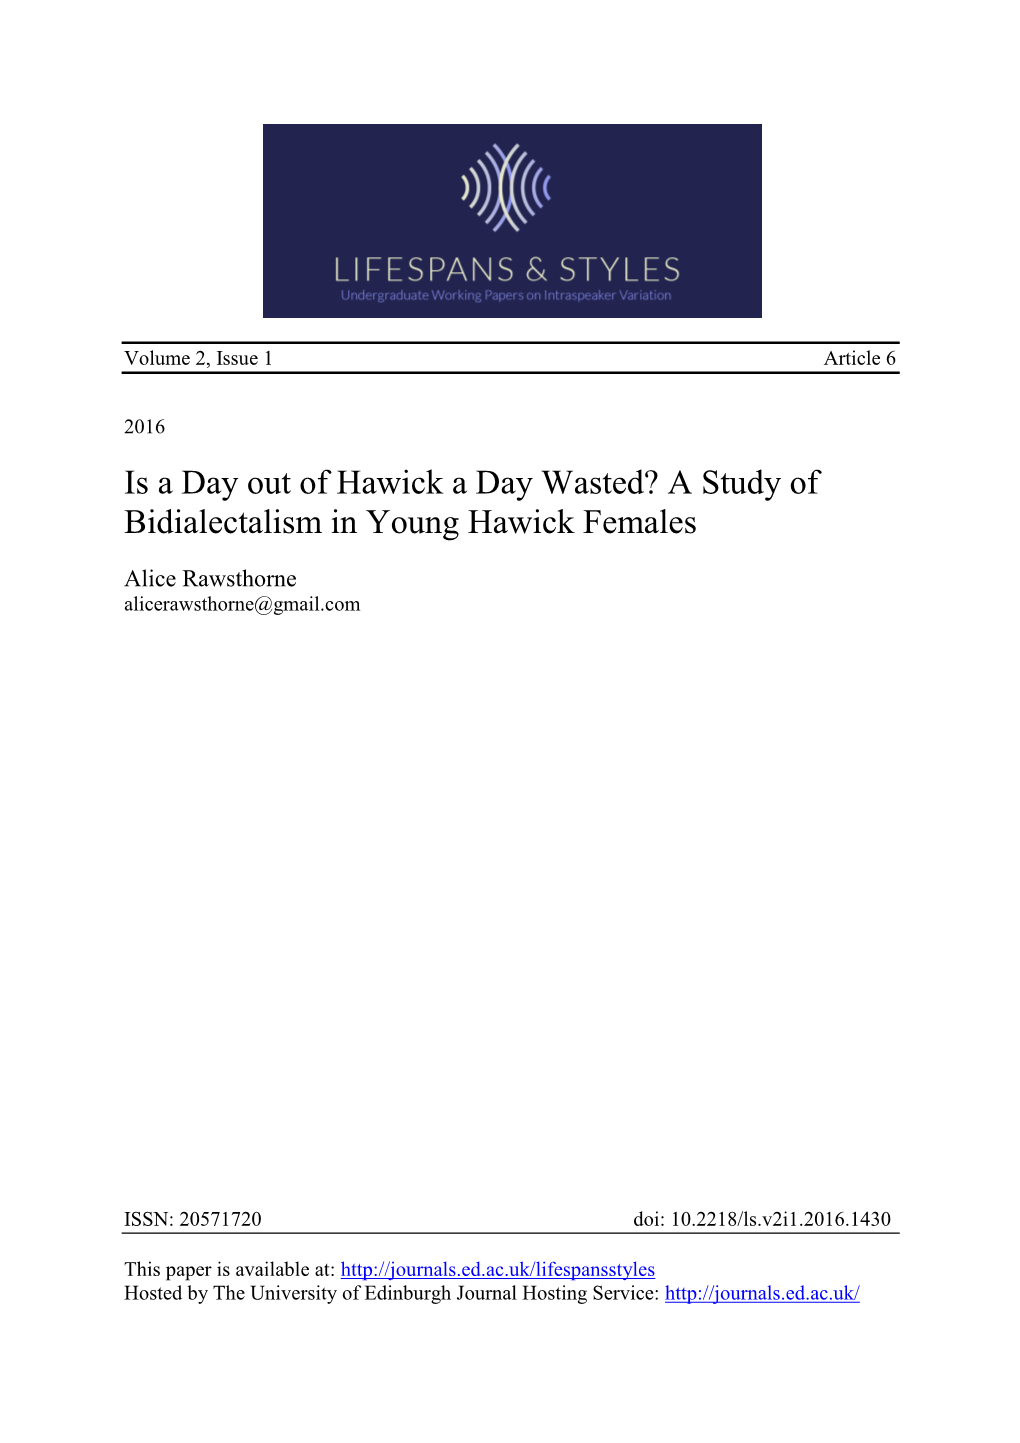 Is a Day out of Hawick a Day Wasted? a Study of Bidialectalism in Young Hawick Females